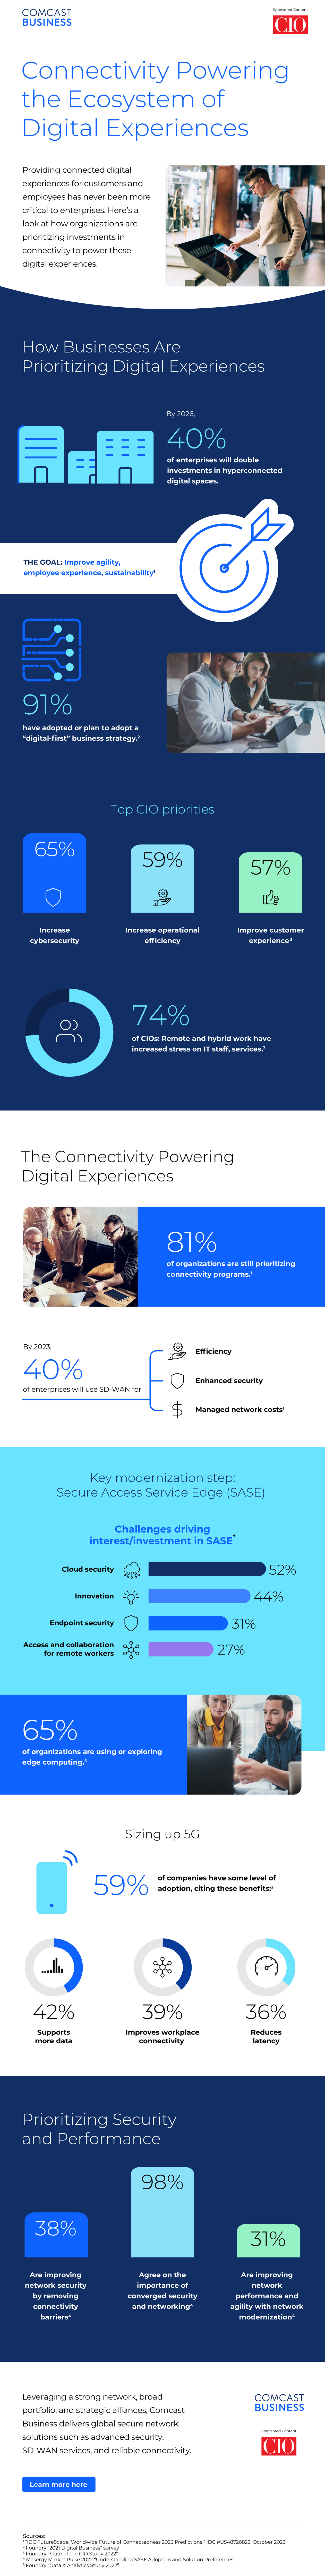 Infographic: Connectivity Powering the Ecosystem of Digital Experiences